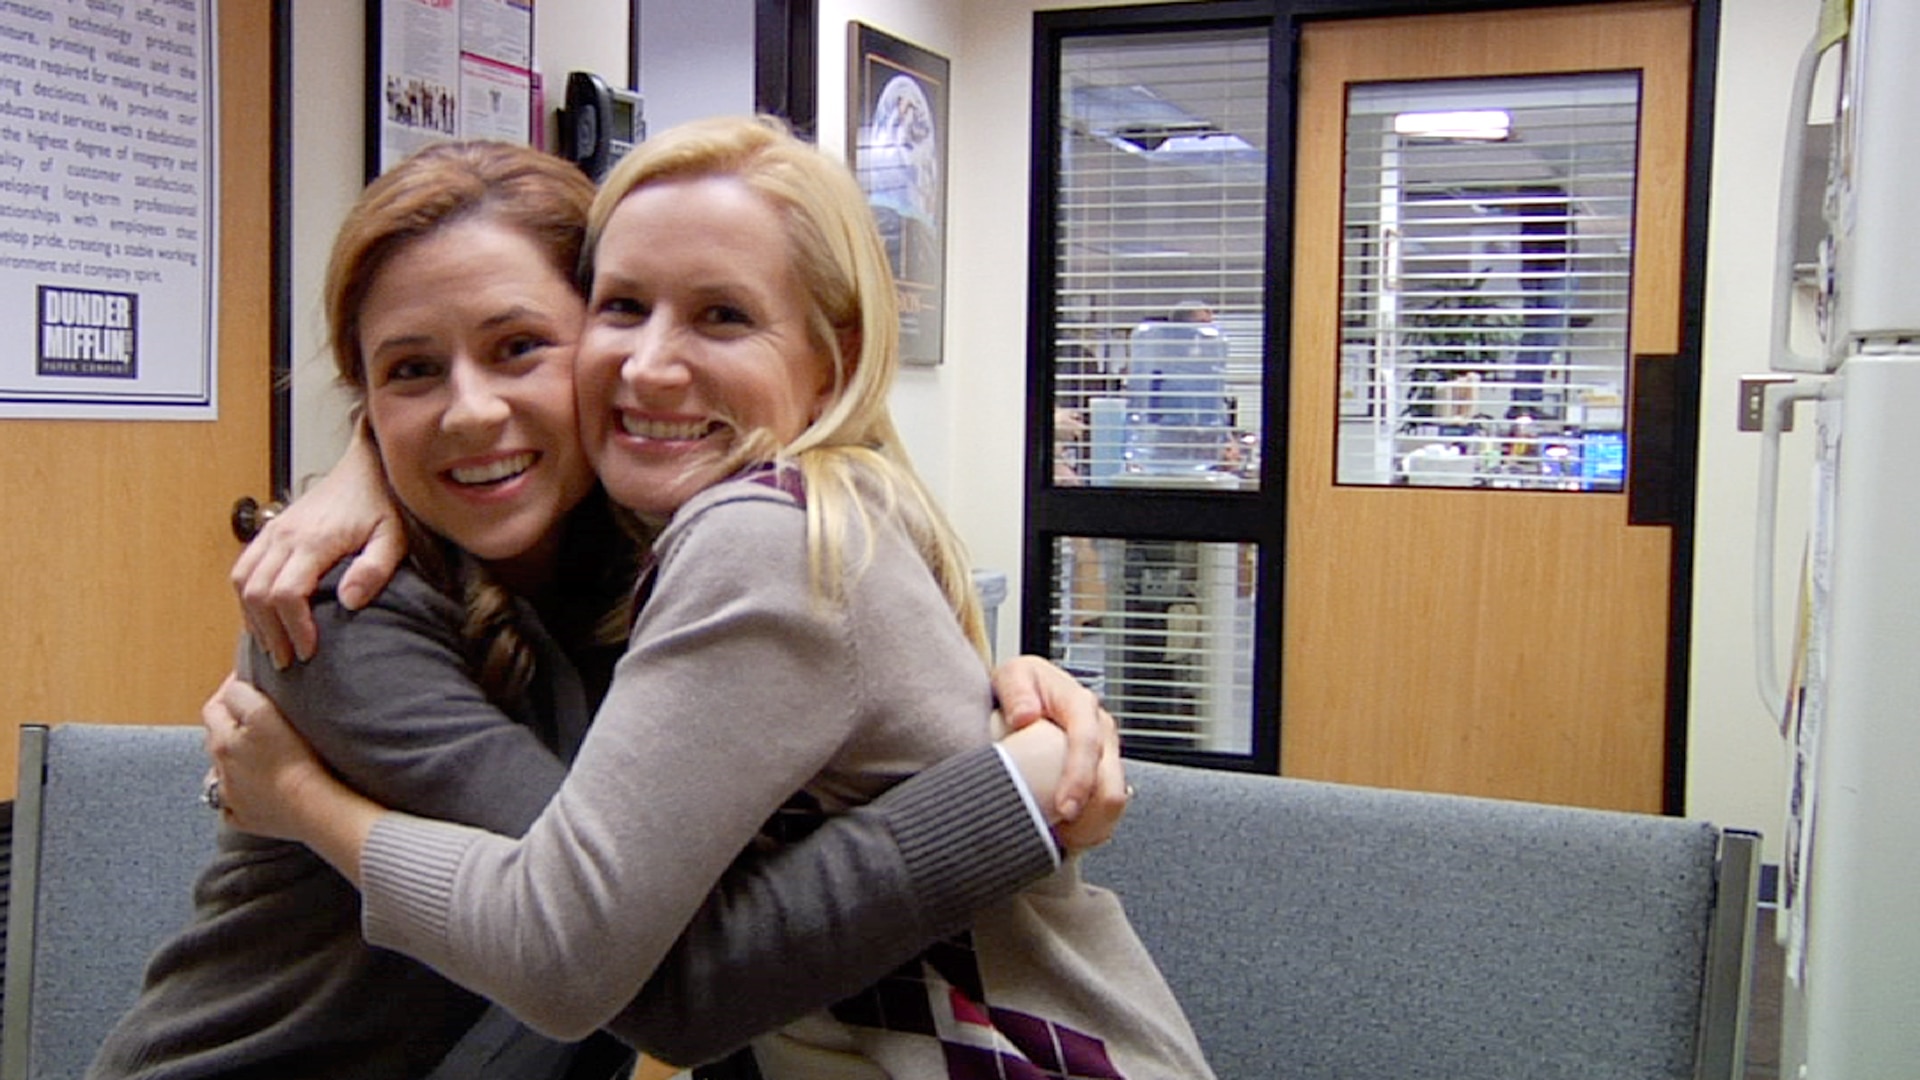 Watch The Office Web Exclusive: Jenna and Angela Q and A - NBC.com.